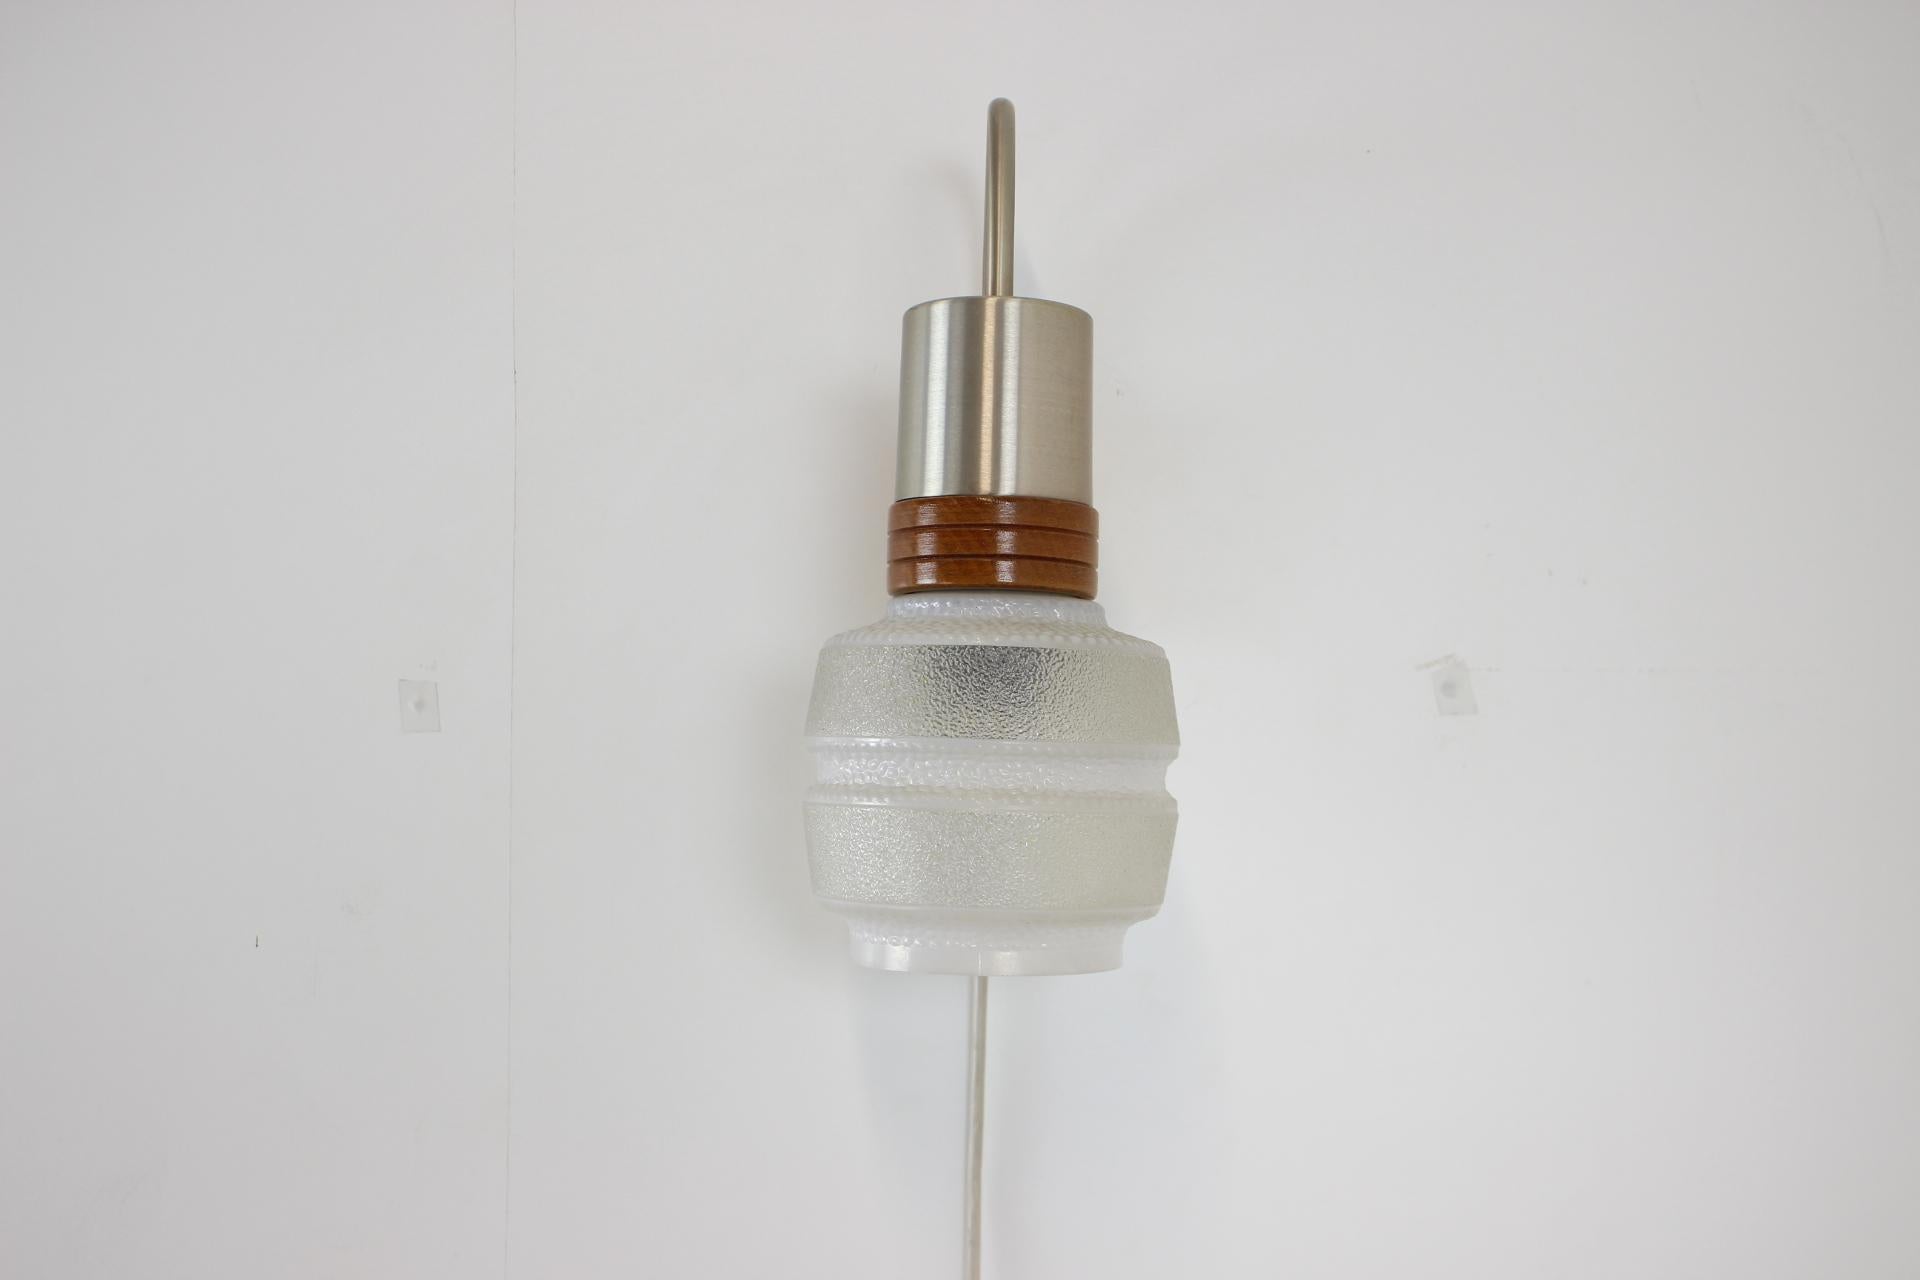 Made in Germany
Made of wood,glass
Bulb 1x60W, E27 or E26
American adapter included.
 